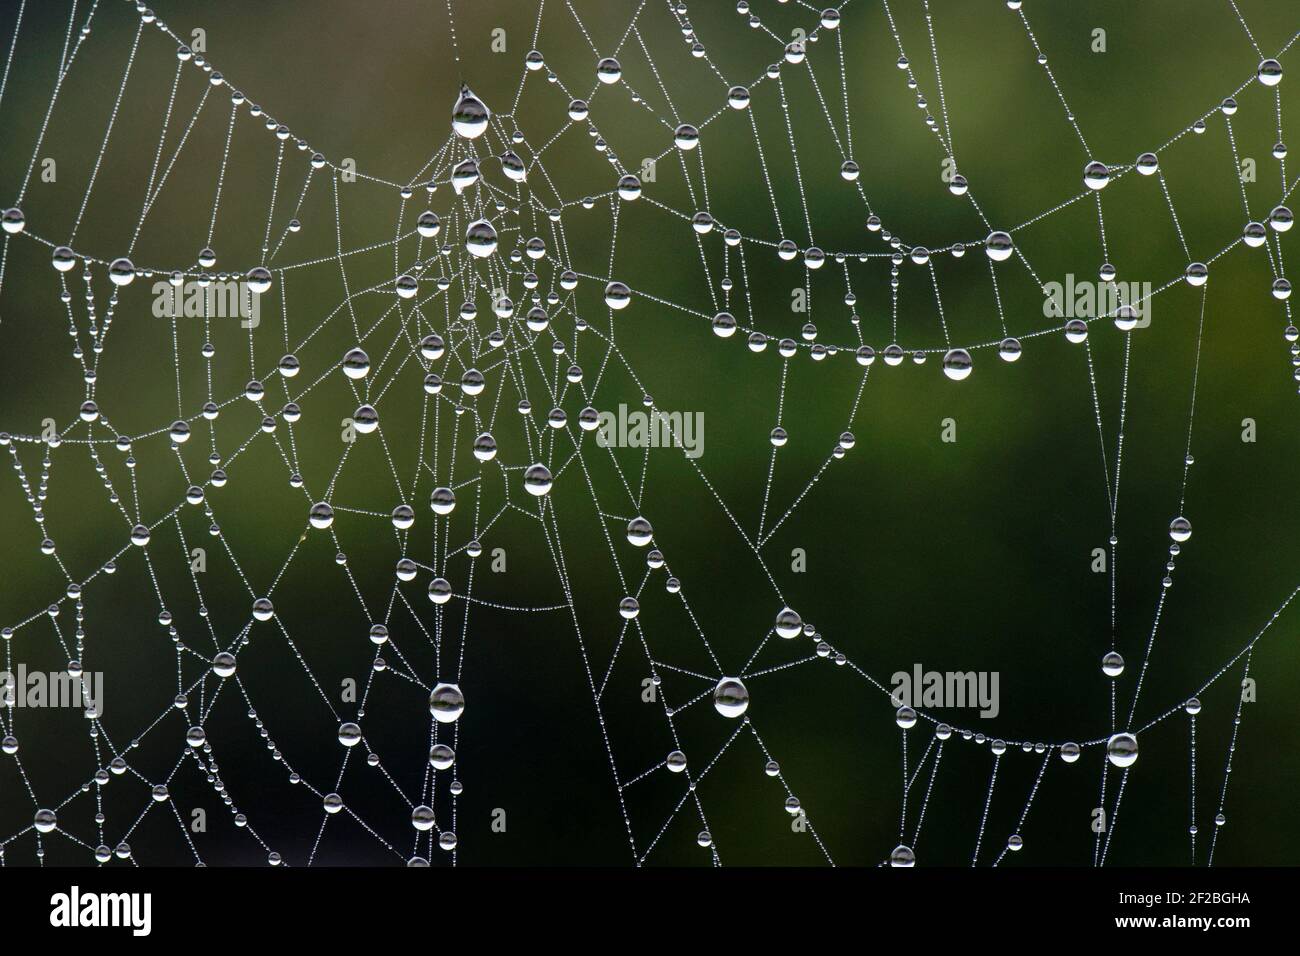 Droplets forned by an early morning mist on the delicate gossamer threads of an orb web spider's web, Berkshire, February Stock Photo